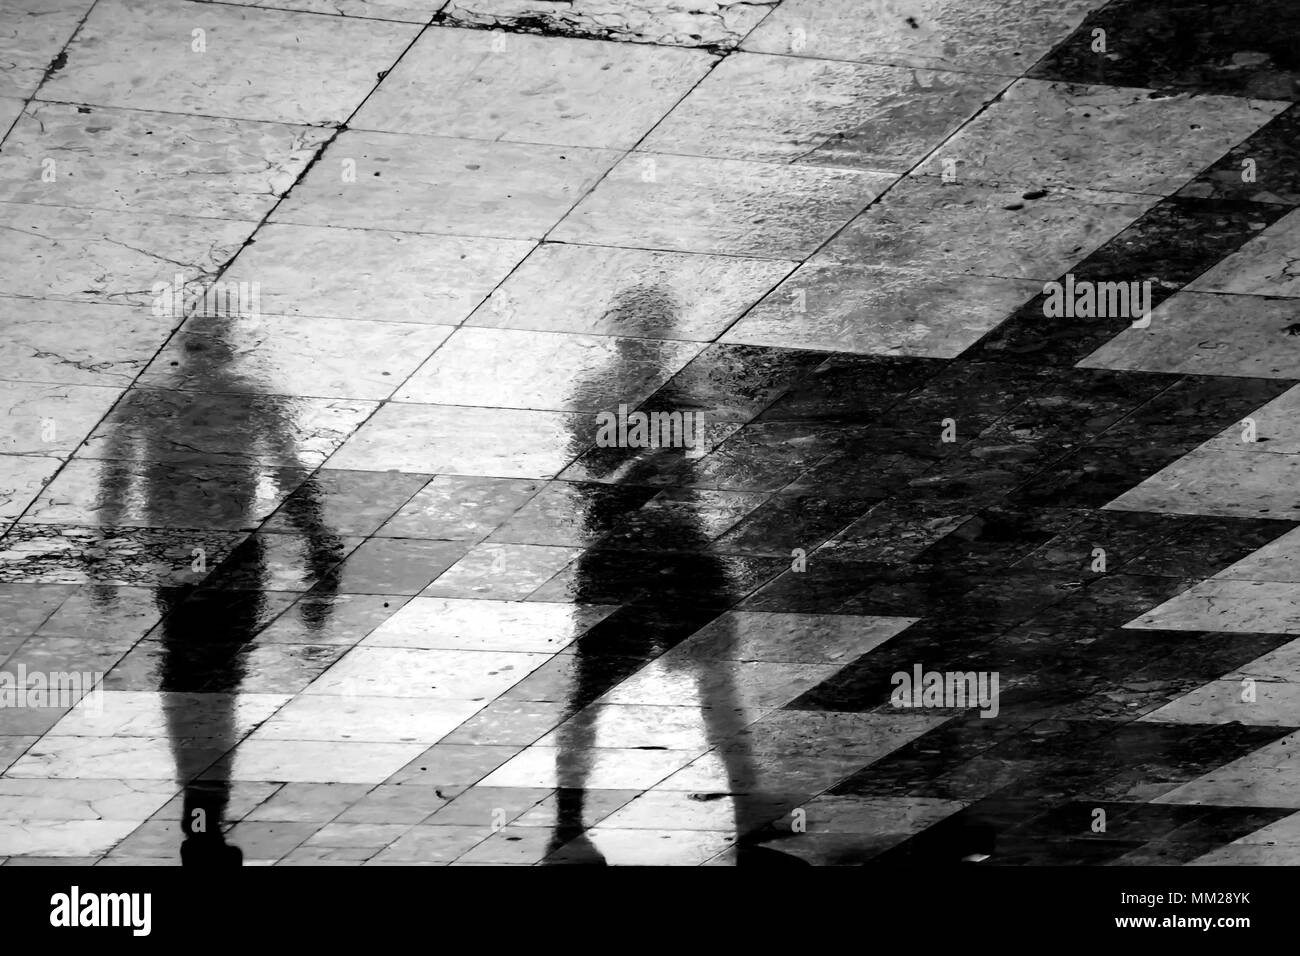 Blurry reflection shadow of two people walking the city street patterned sidewalk on a  rainy spring day Stock Photo